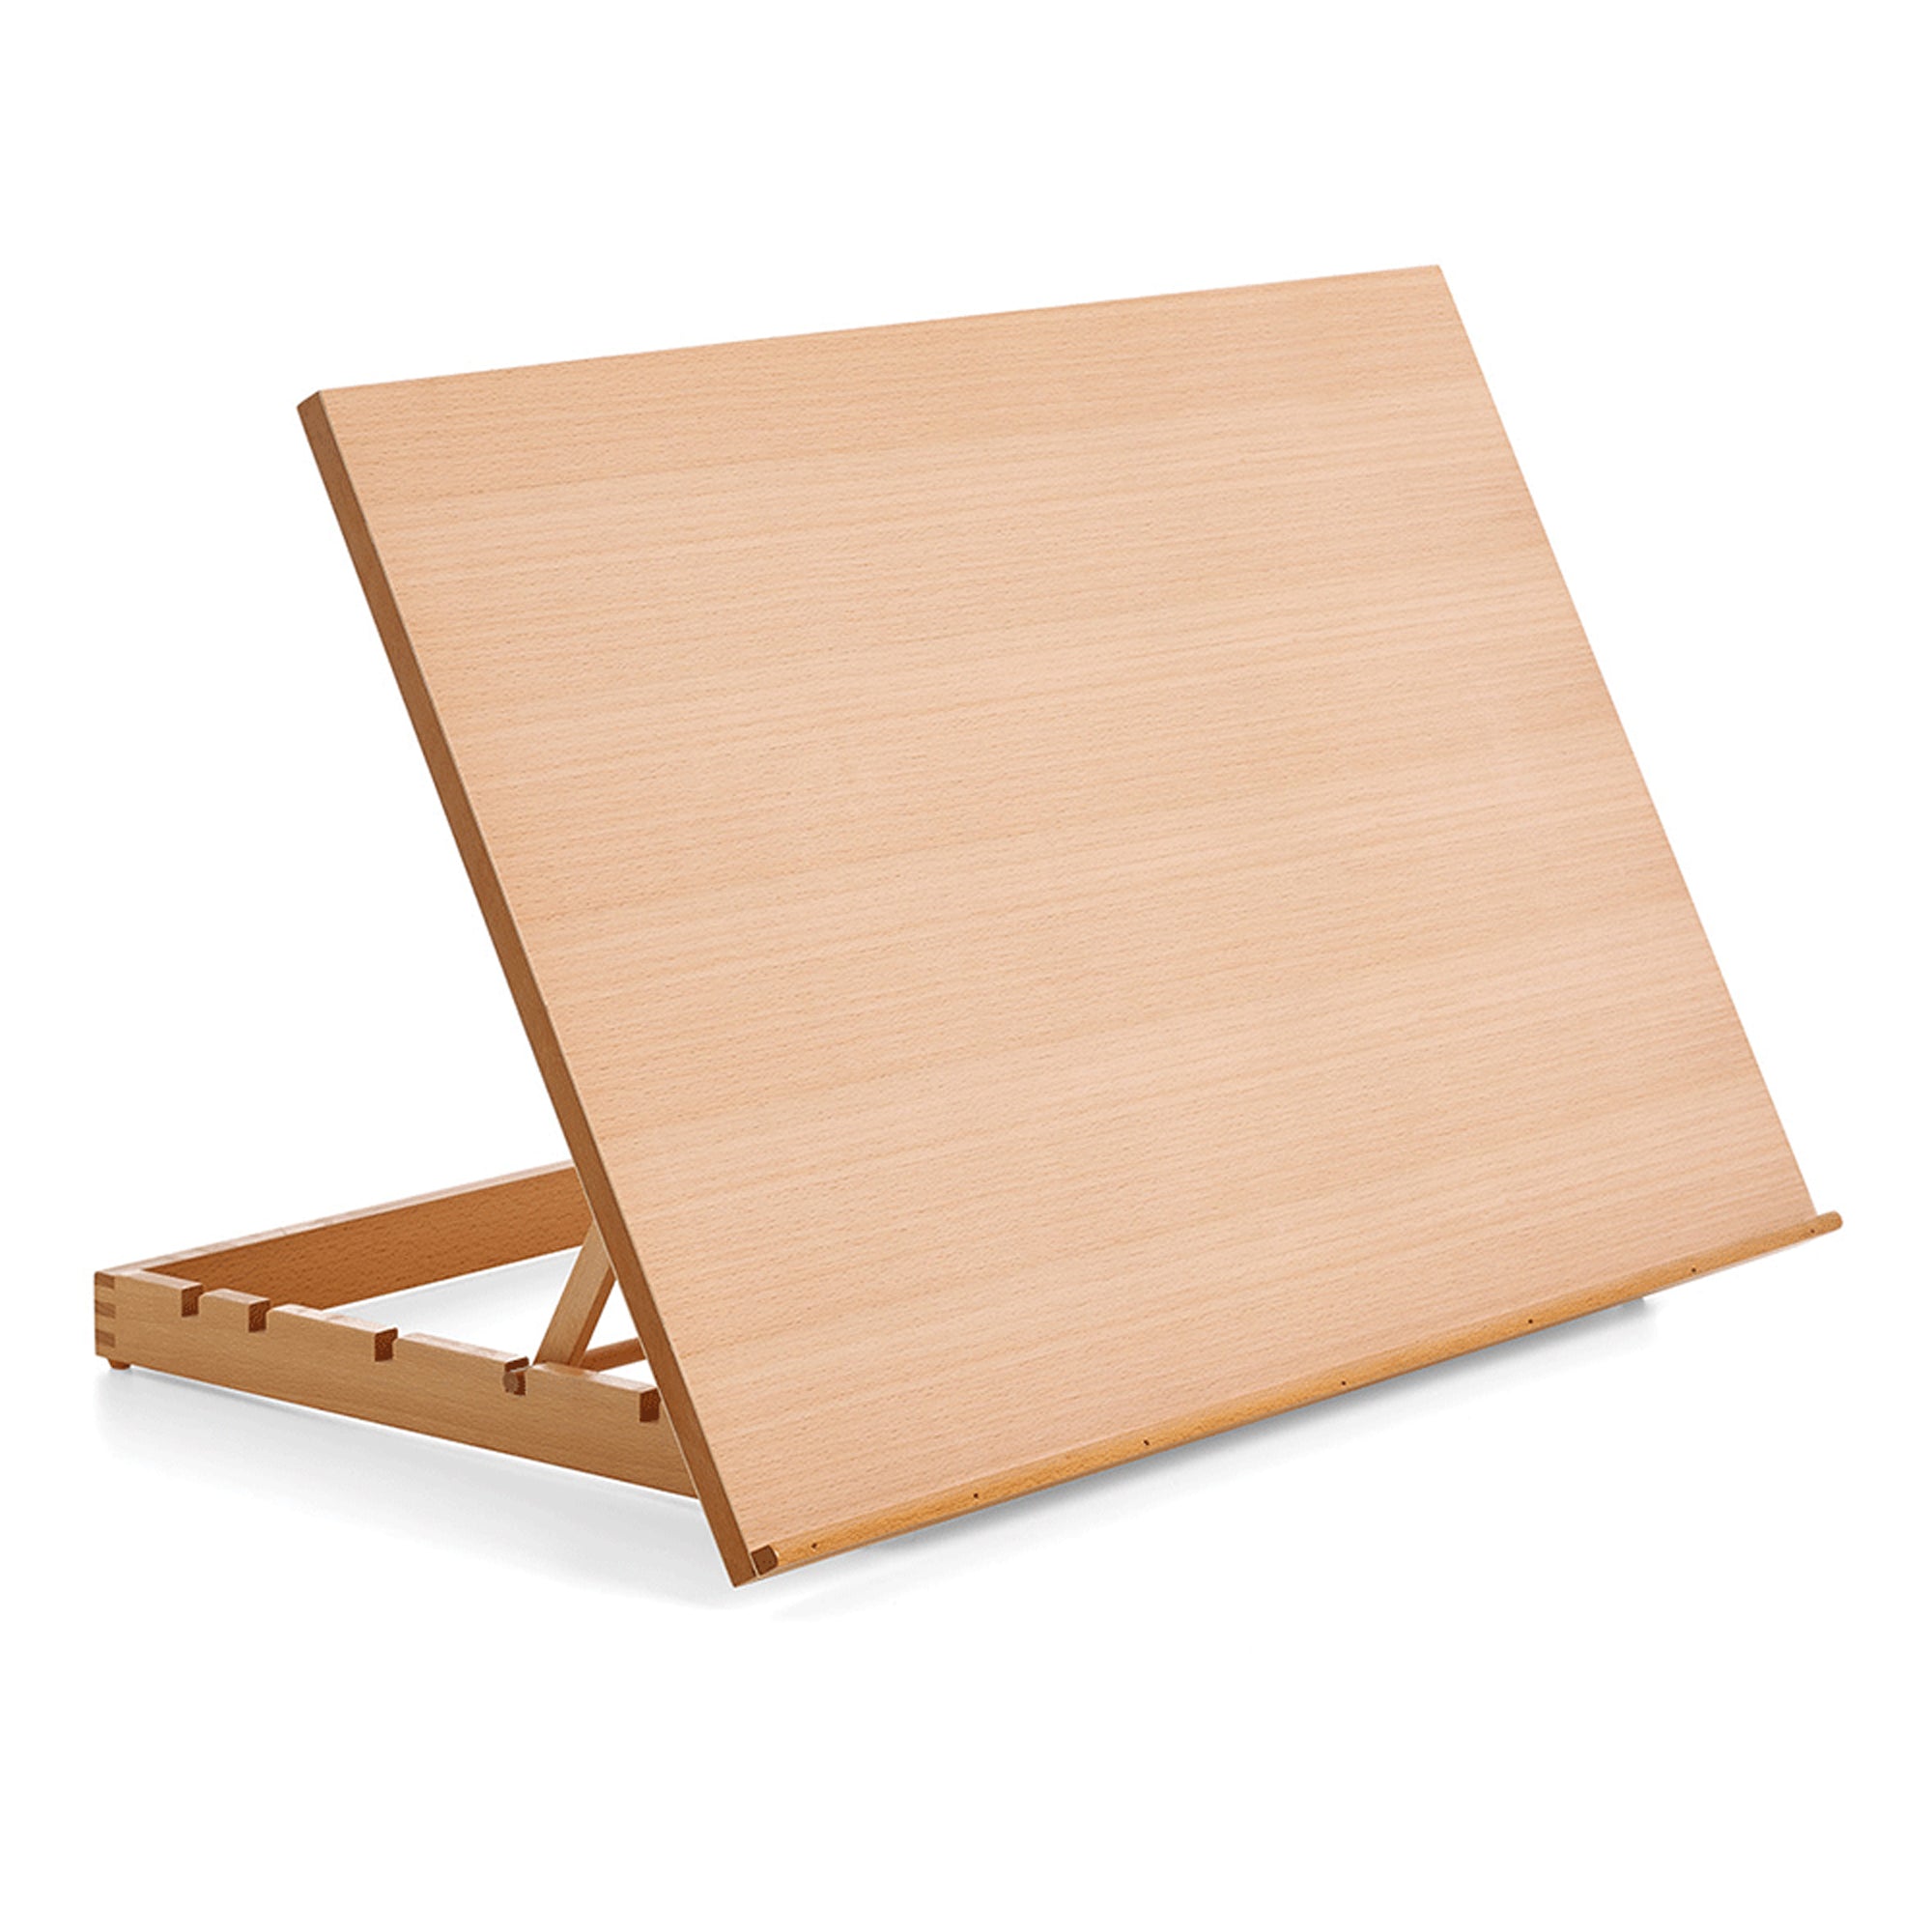 Danube A2 Art & Craft Table Easel/Drawing Board